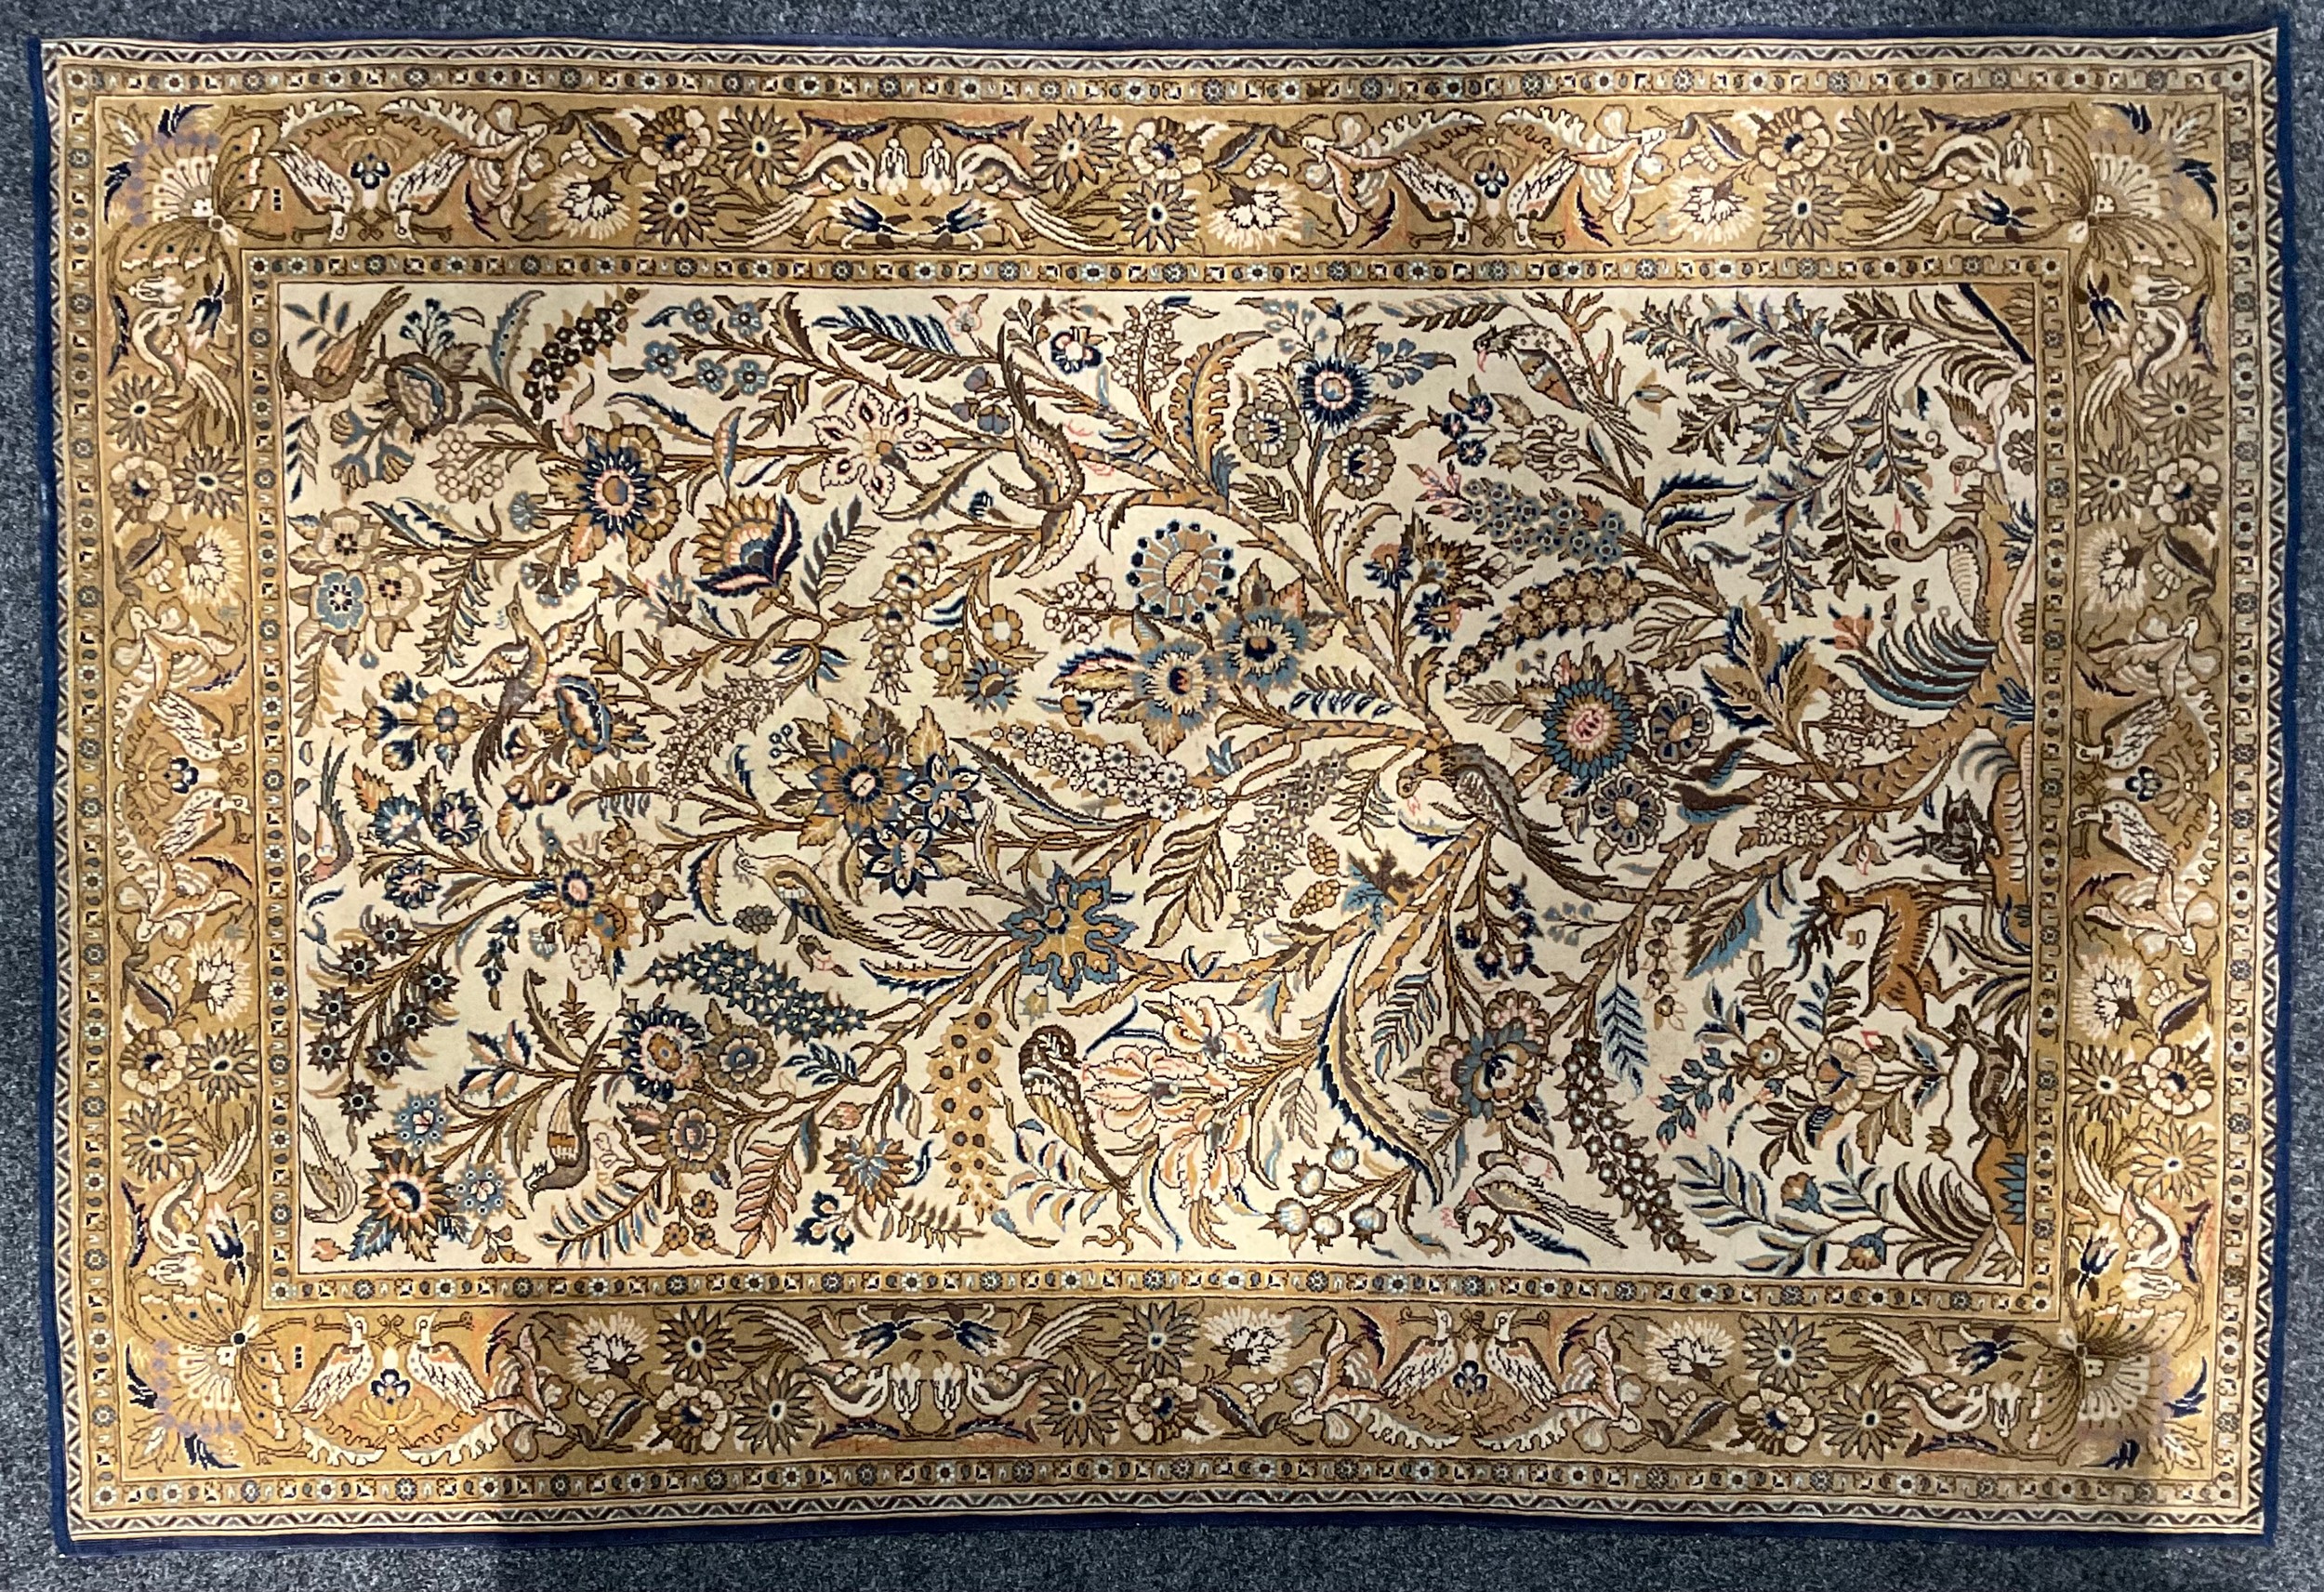 An Iranian silk Gohm type rug, decorated with birds and flowering foliage, in shades of golden